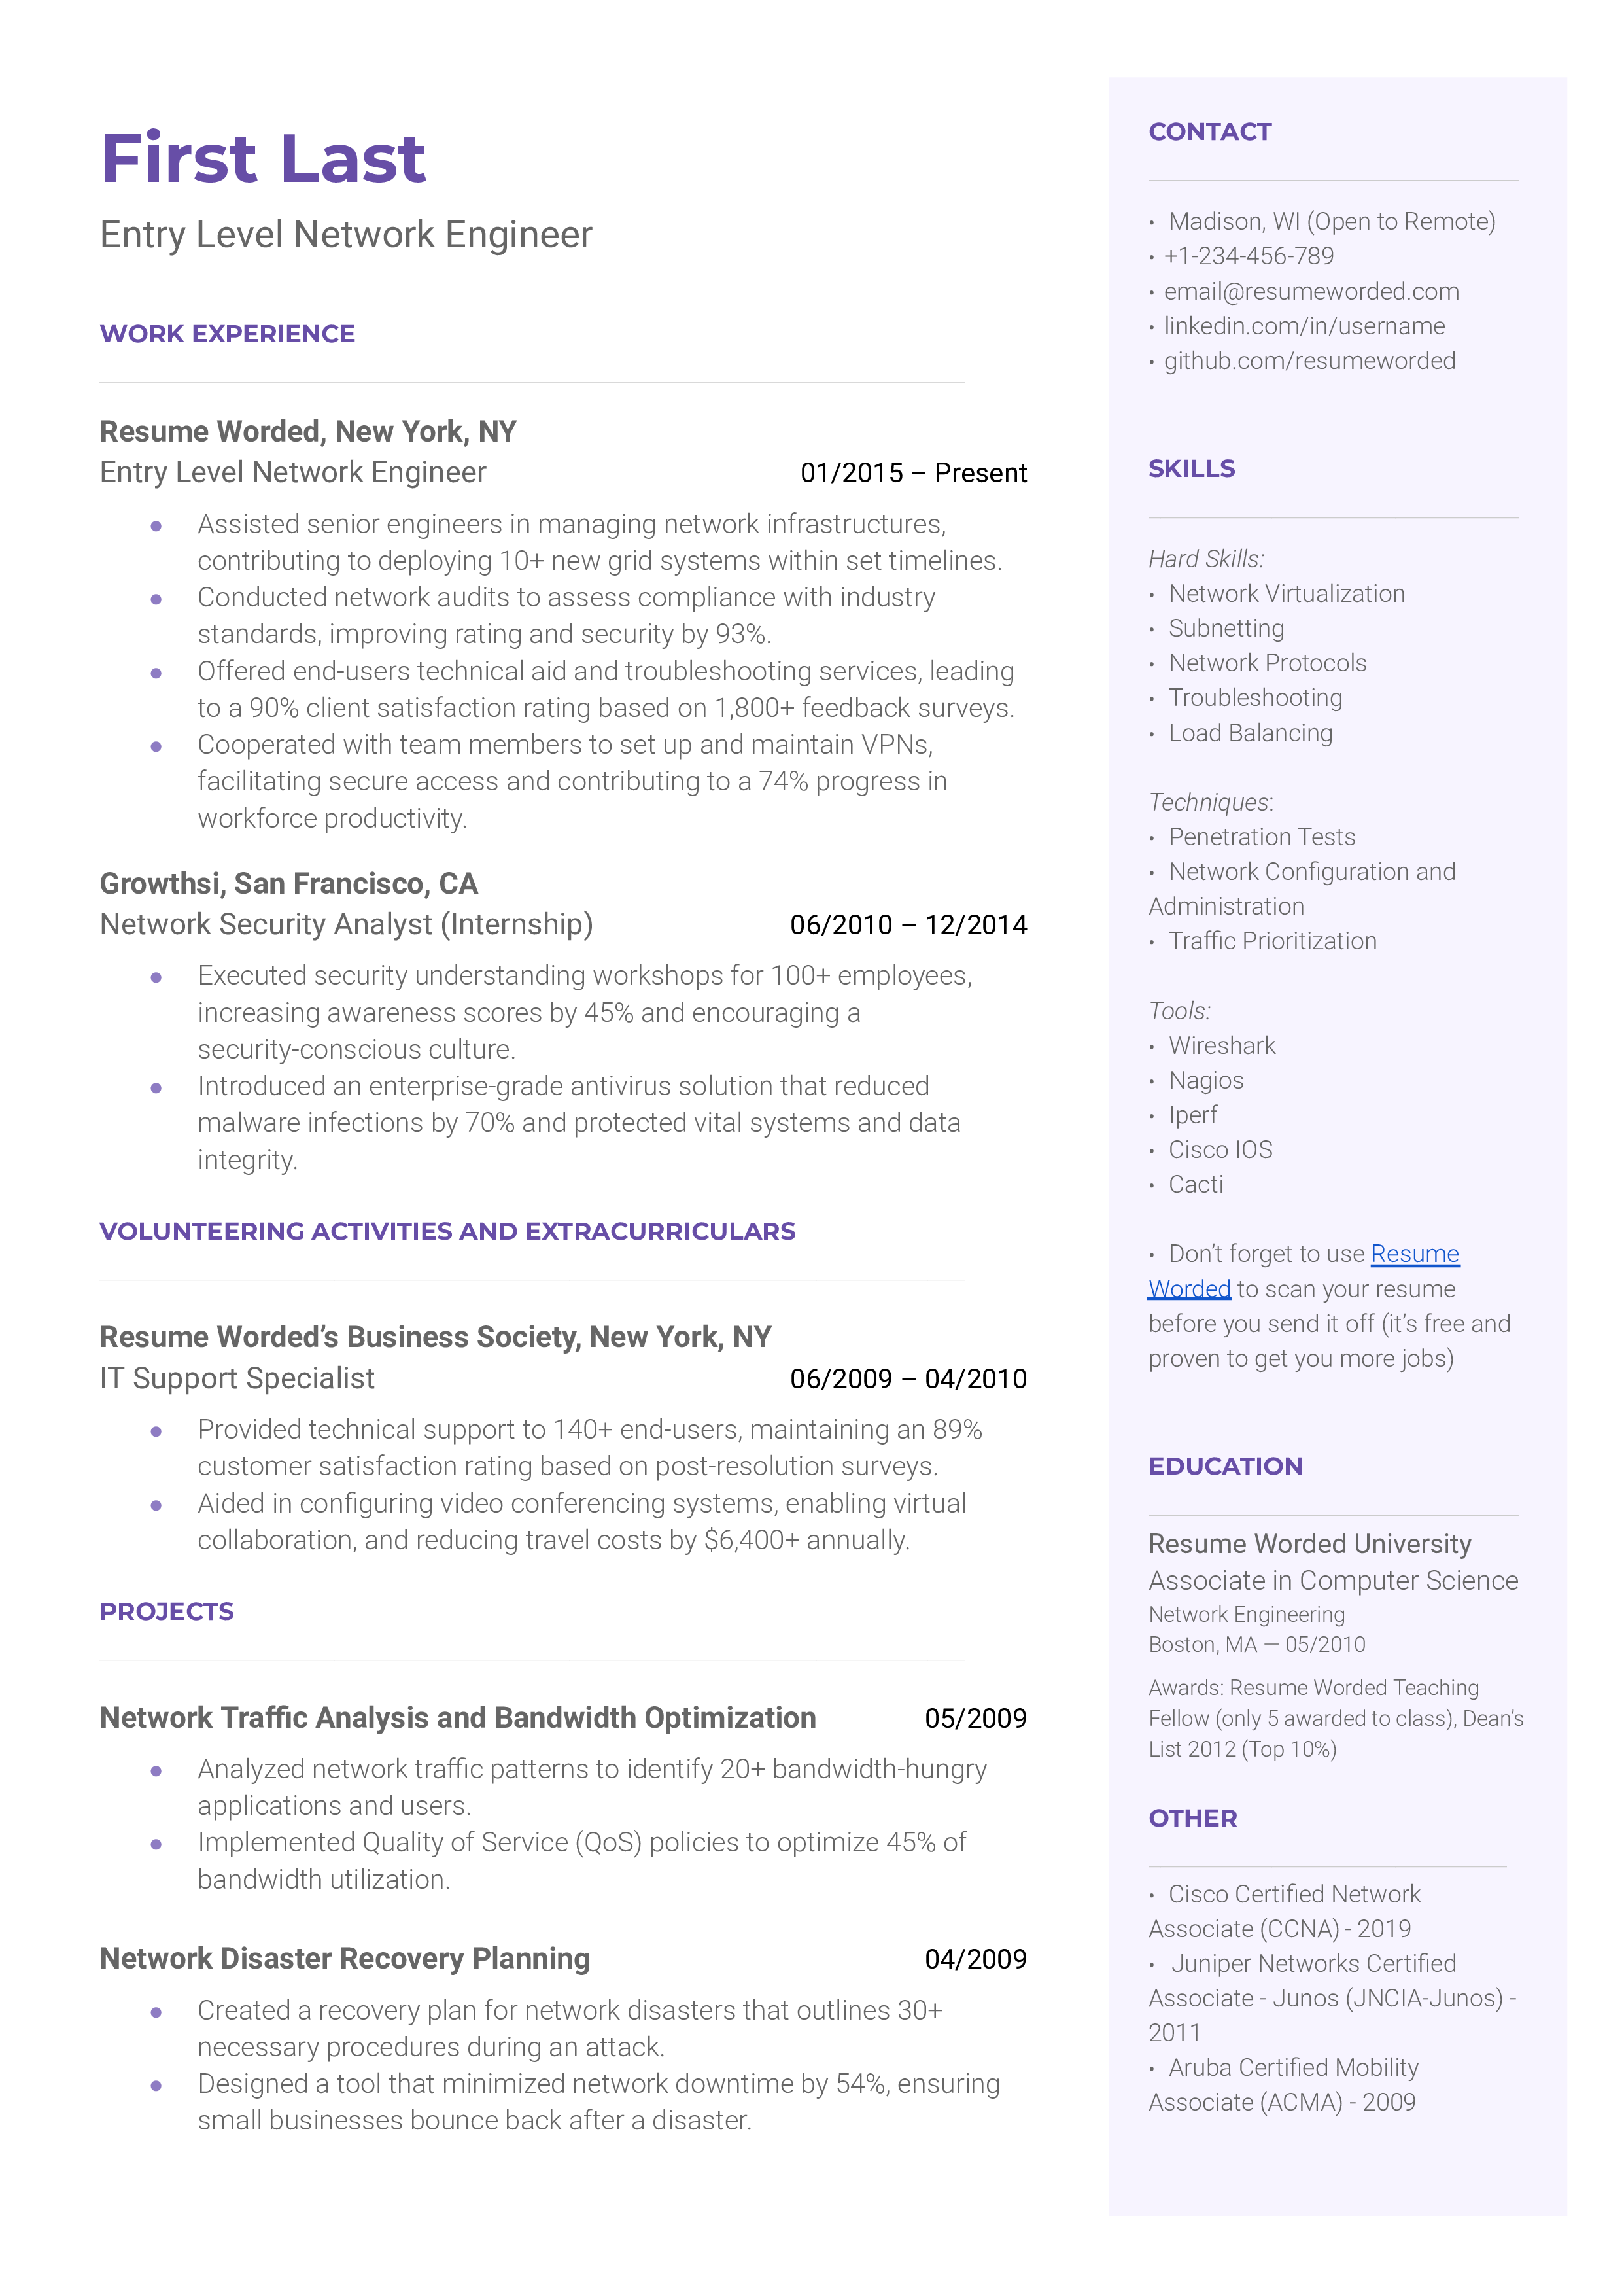 An entry-level network engineer's CV showcasing certs and troubleshooting skills.